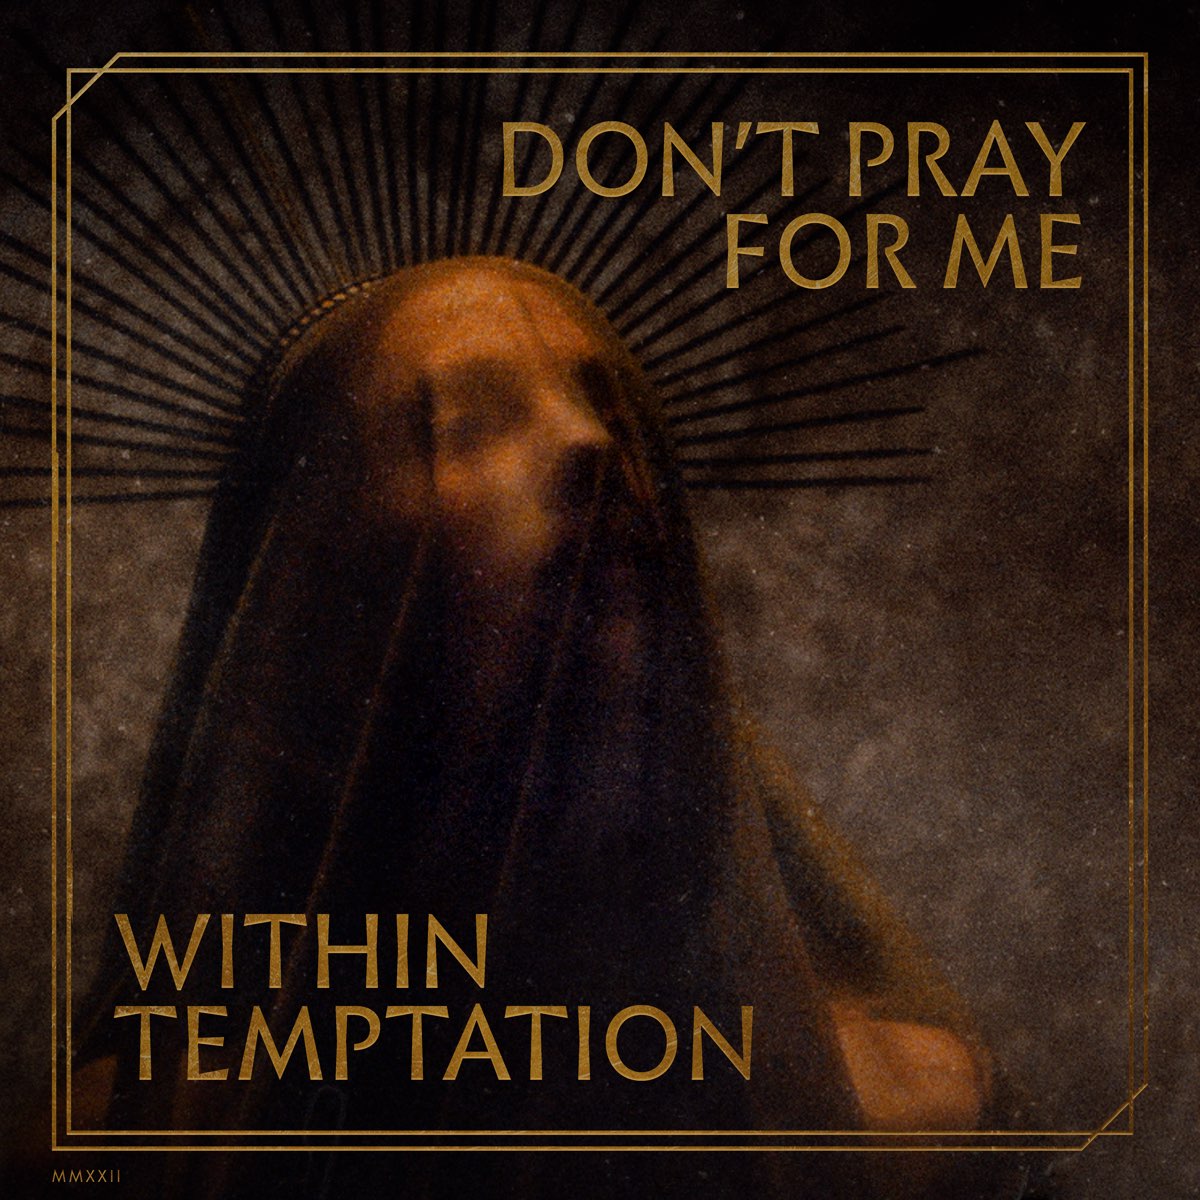 Don't pray for me - WITHIN TEMPTATION